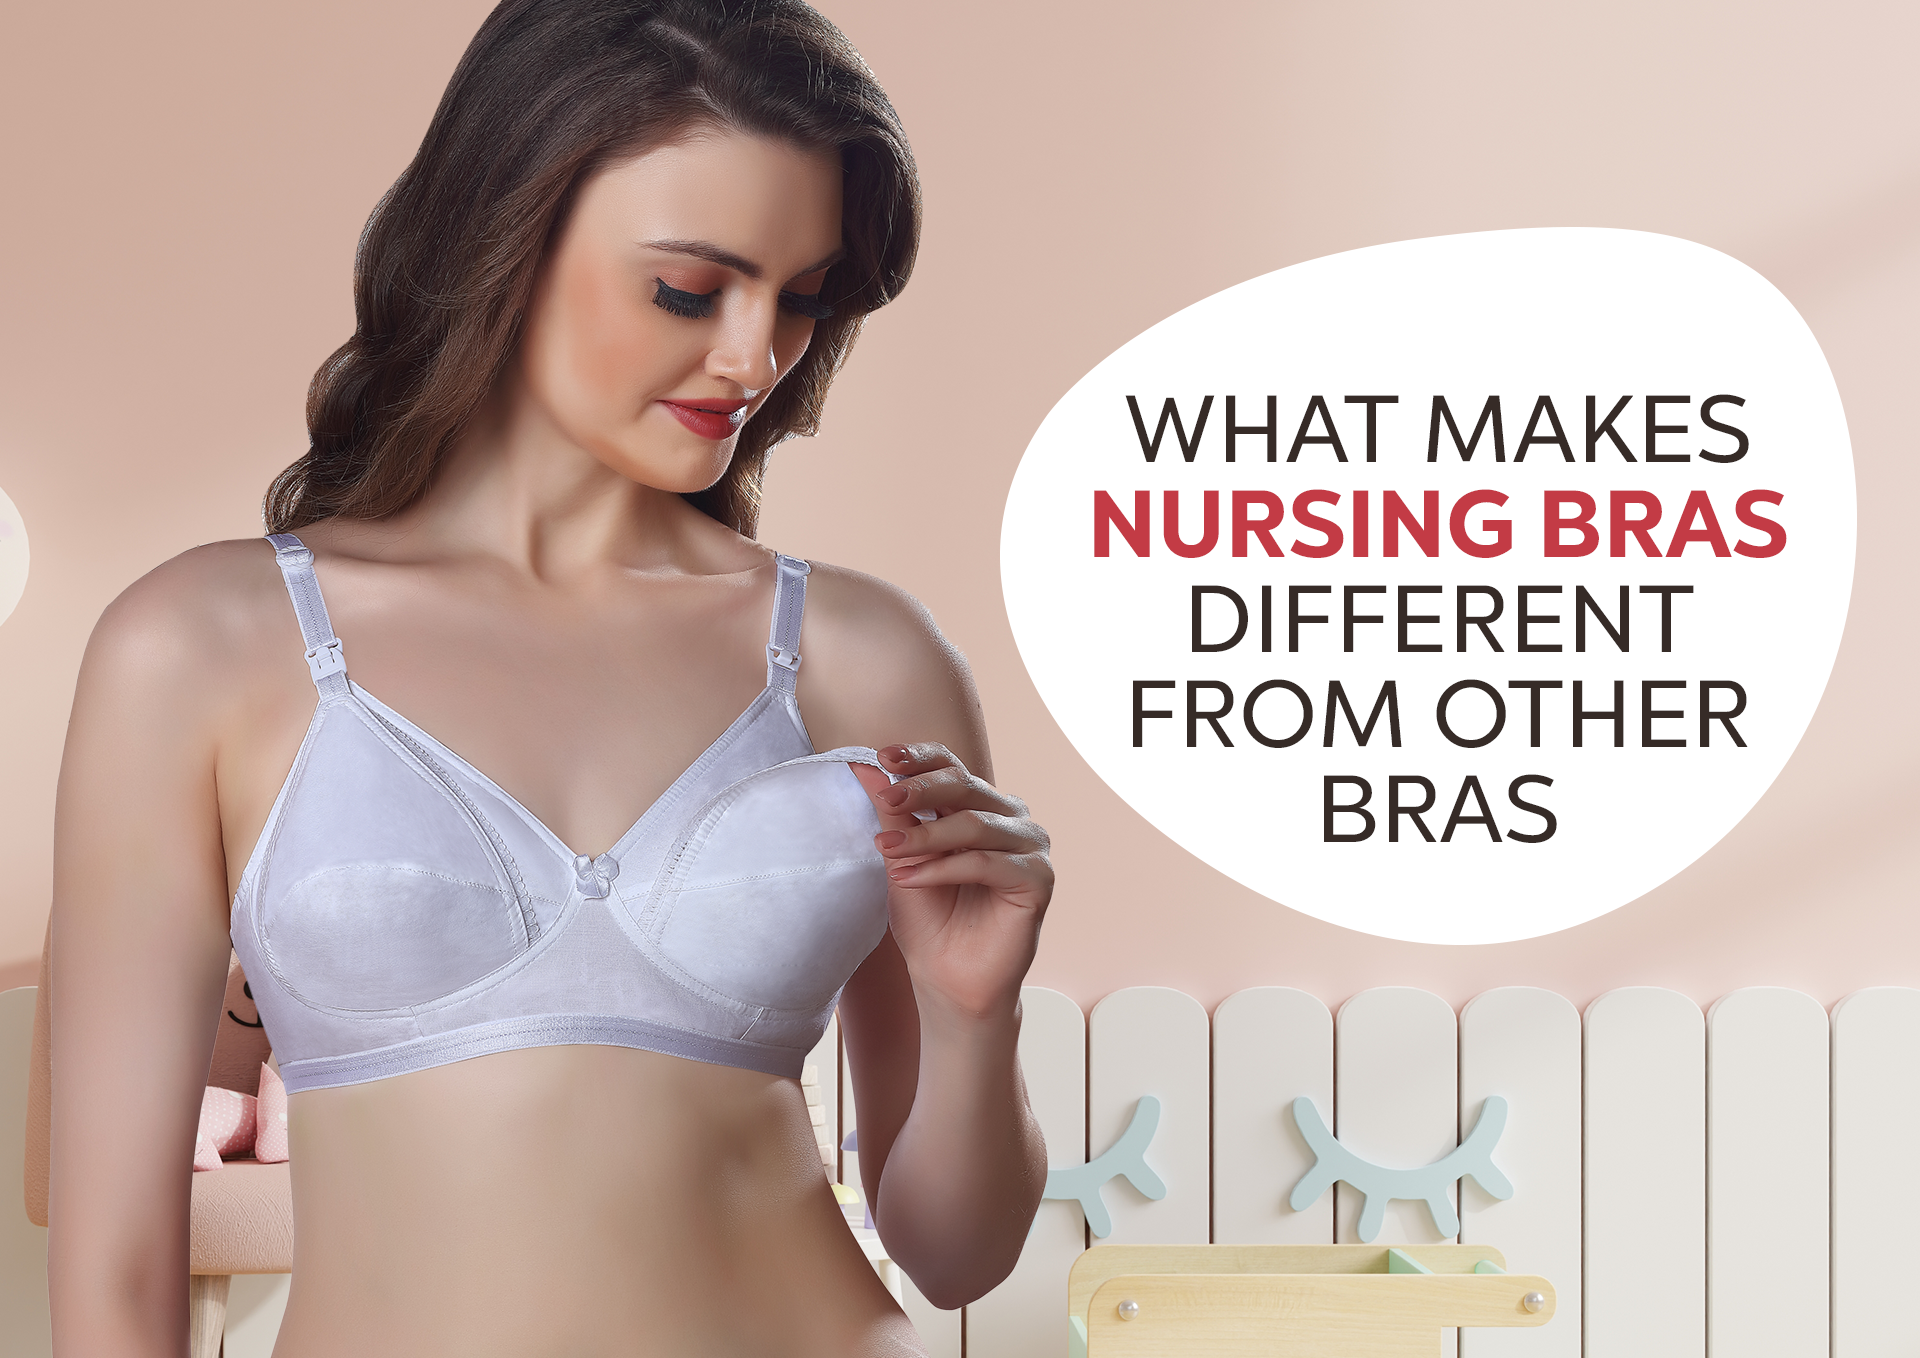 The Difference Between Maternity and Nursing Bras